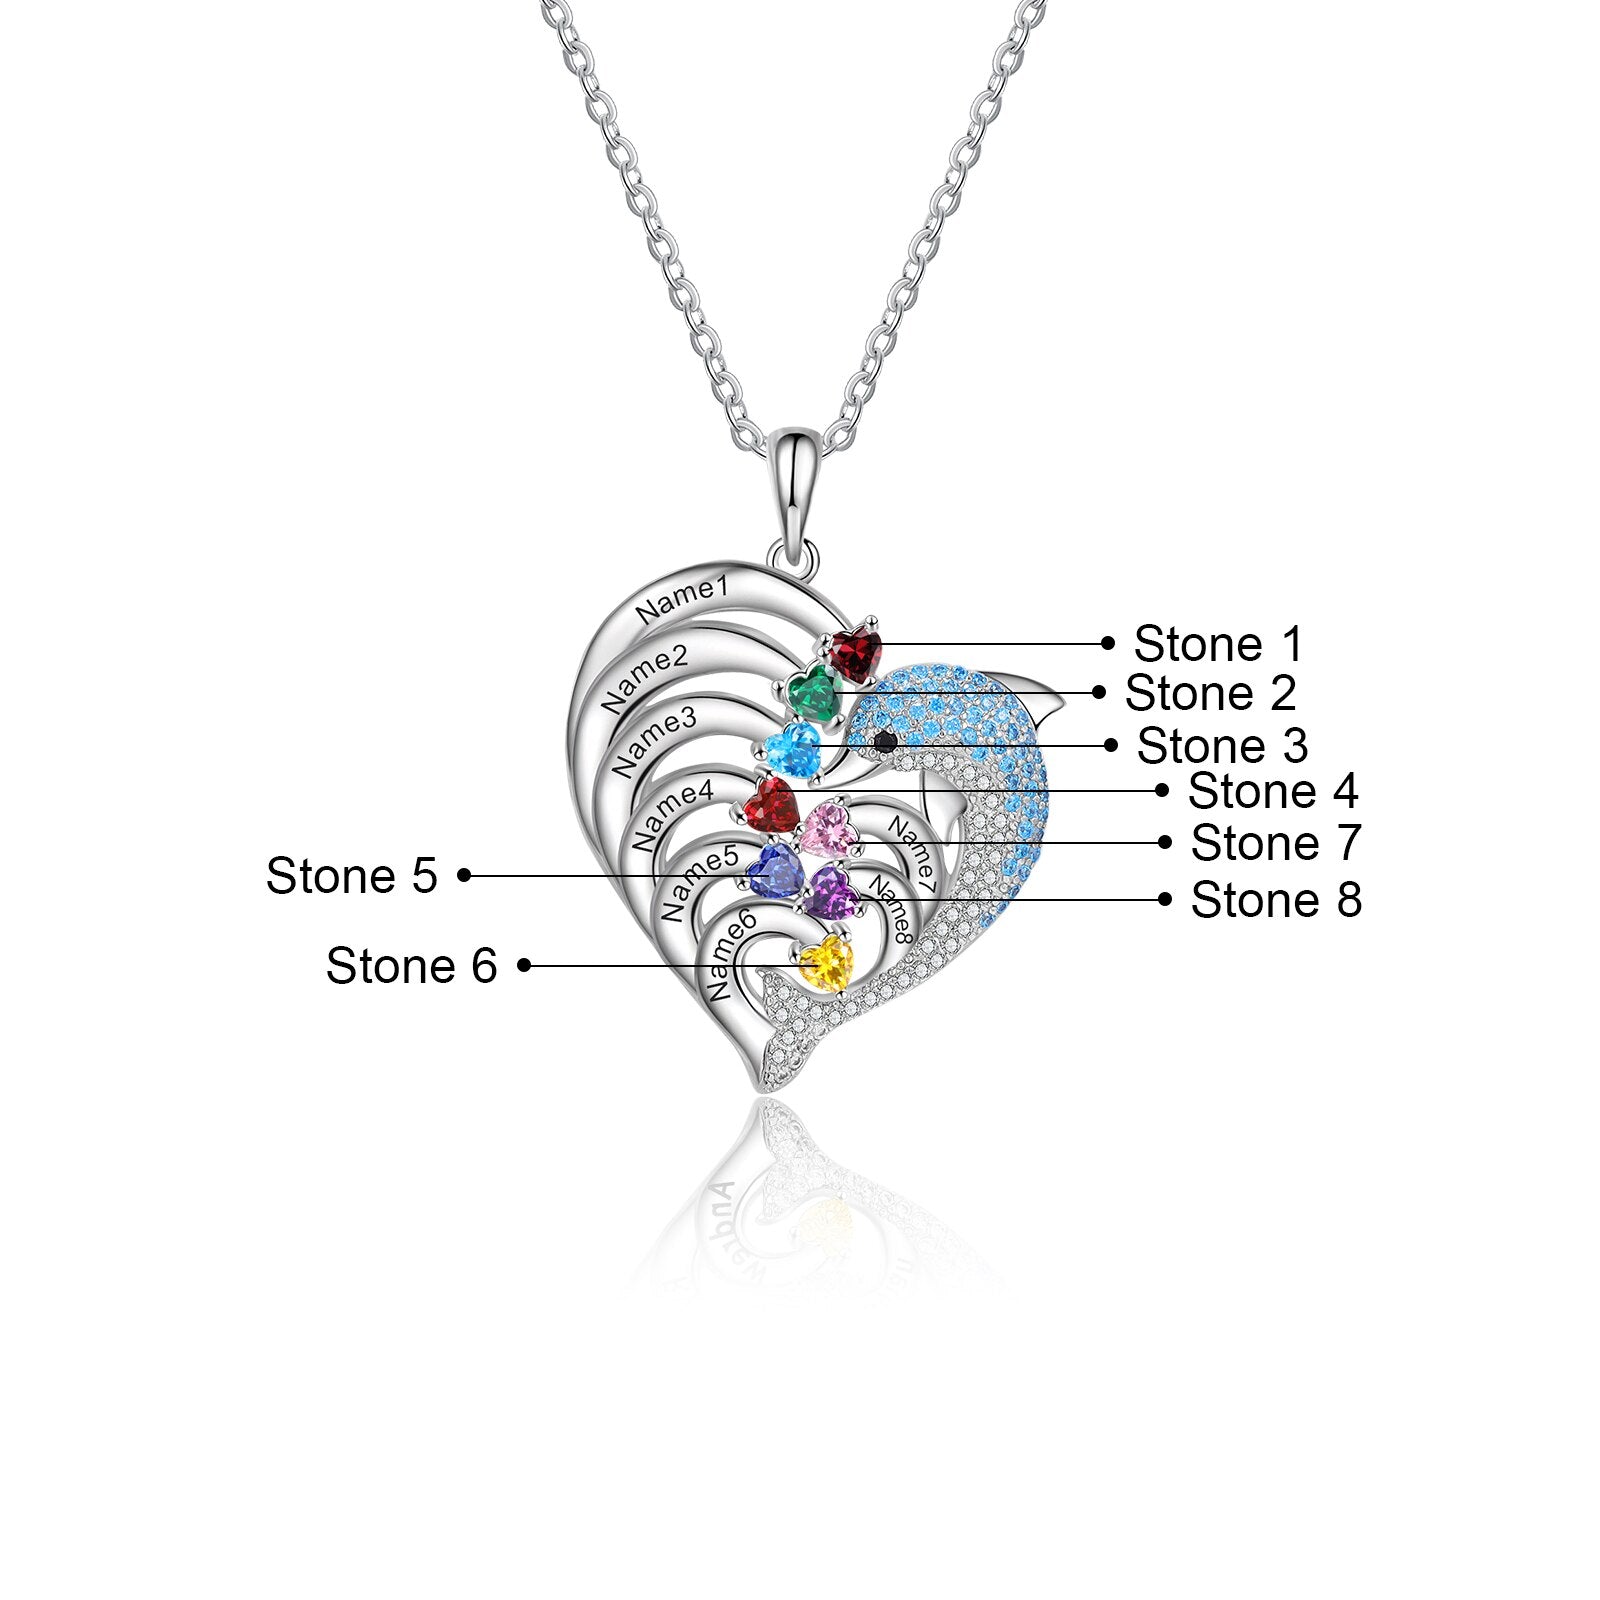 https://shinyjoules.com/collections/necklace birthstone peronalized necklace